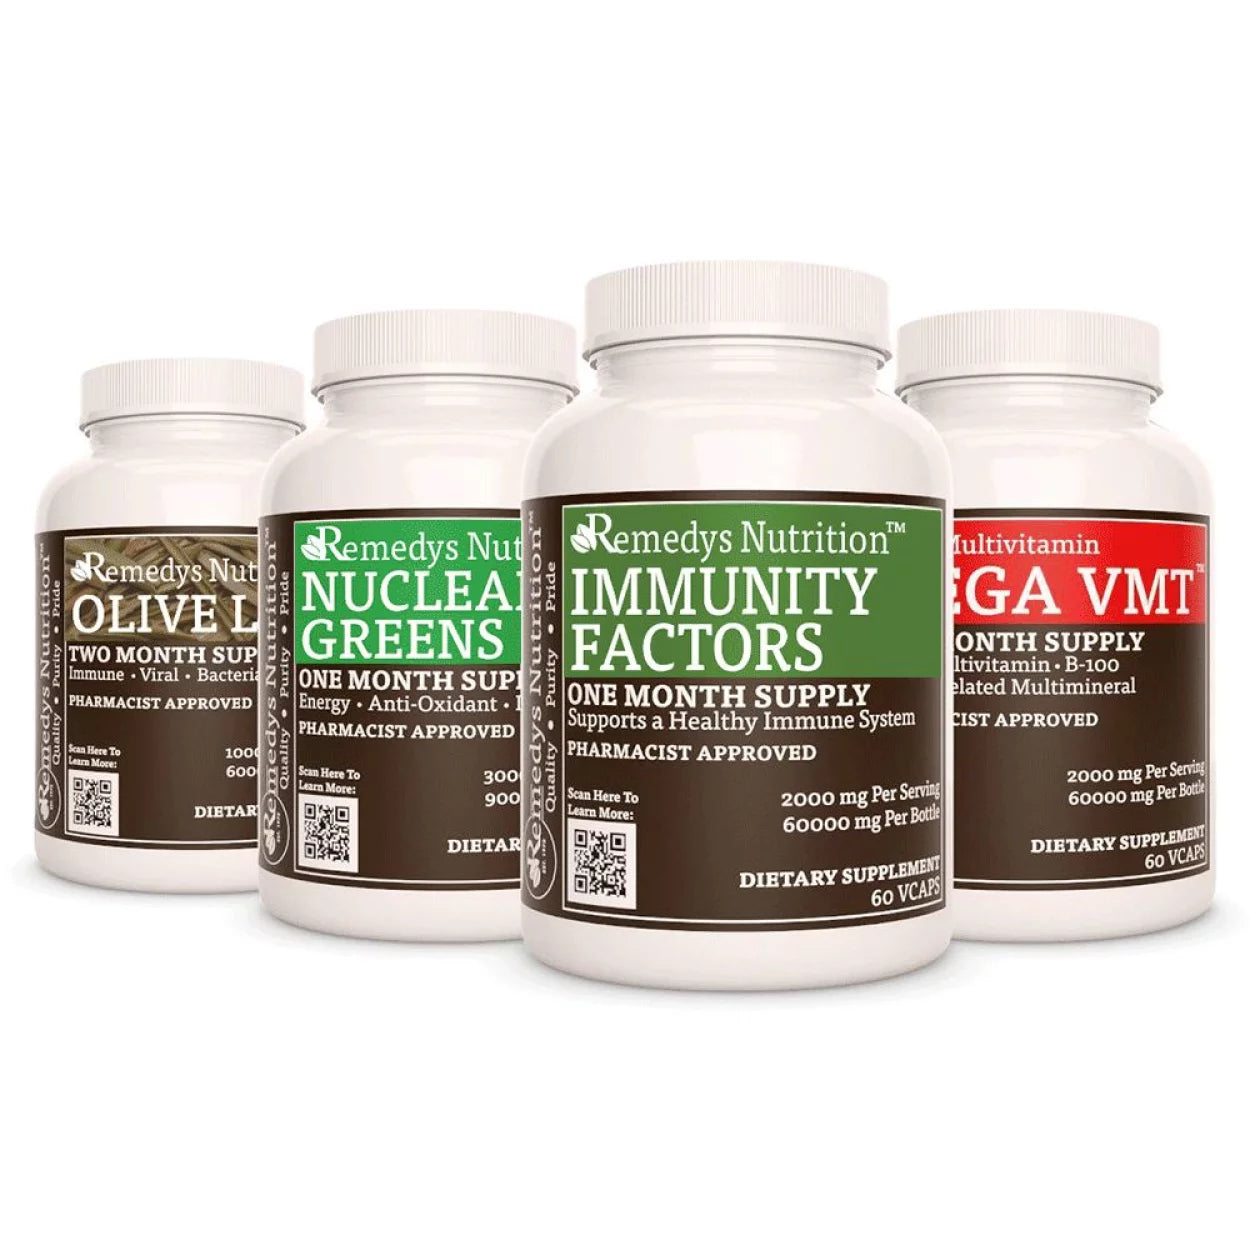 Image of Remedy's Nutrition® Immune Power Pack™ contains bottles: Immunity Factors™, Mega VMT™, Olive Leaf, Nuclear Greens™.